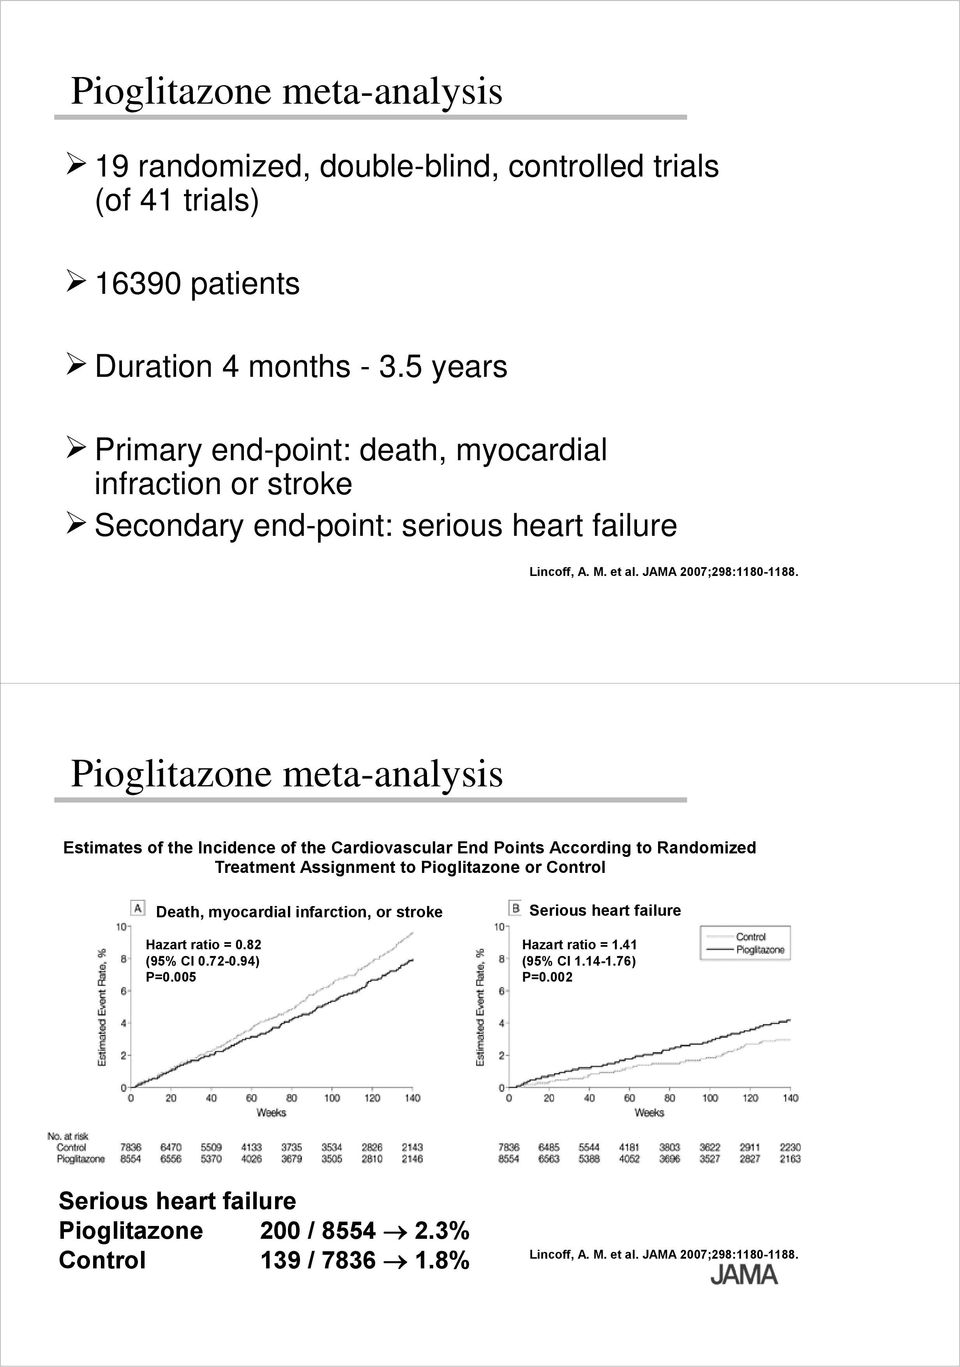 Pioglitazone meta-analysis Estimates of the Incidence of the Cardiovascular End Points According to Randomized Treatment Assignment to Pioglitazone or Control Death, myocardial